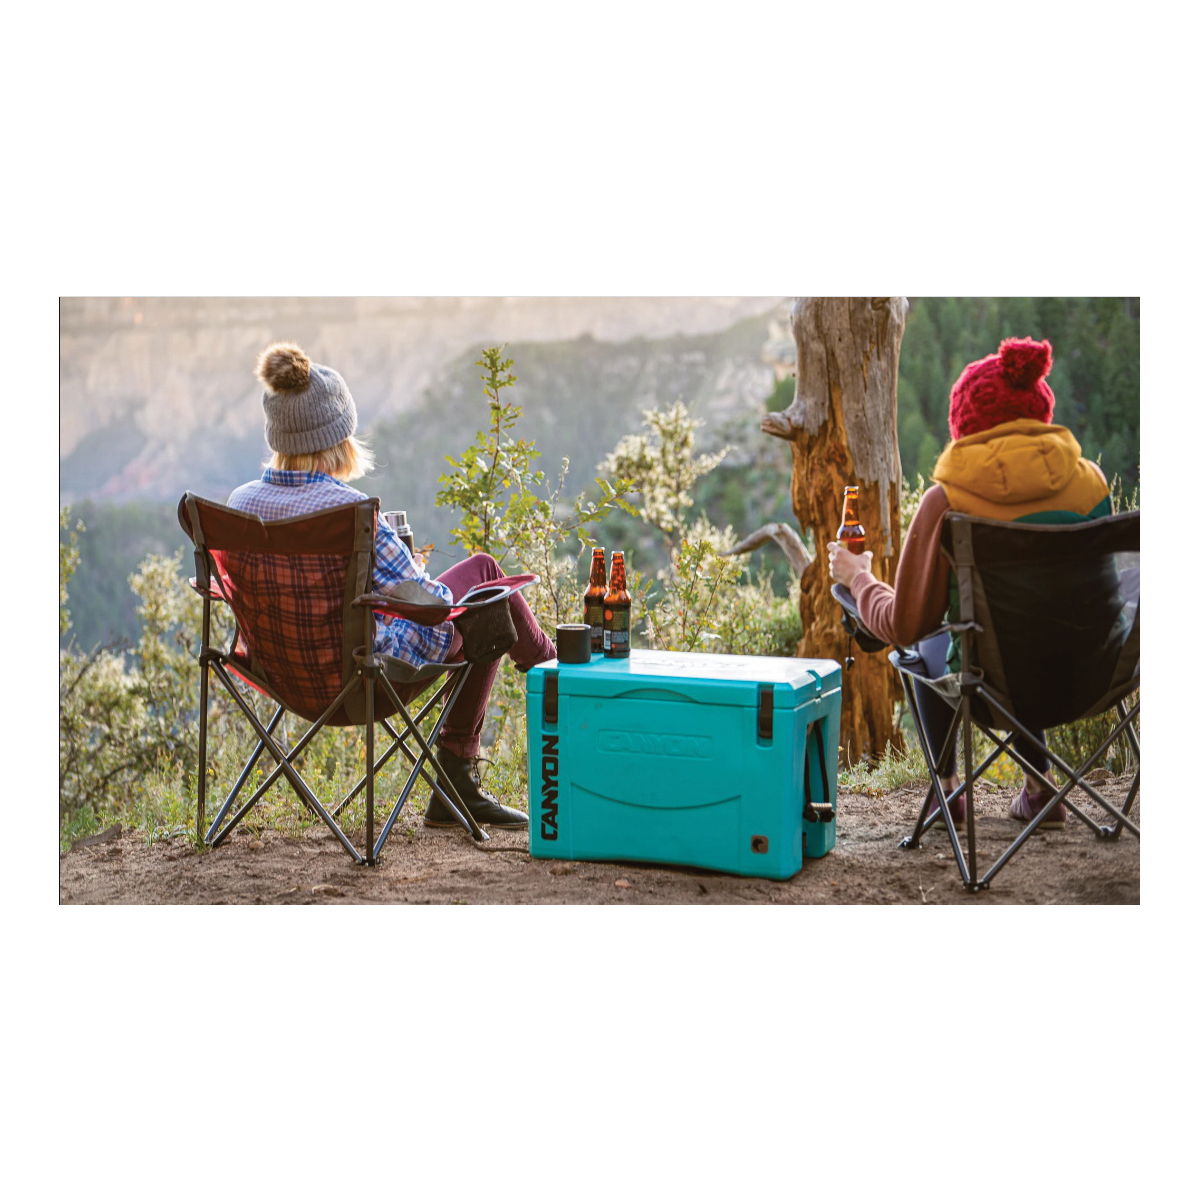 Canyon Coolers X35S Outfitter Cooler, 35 qt Capacity, 23-3/4 in L, 15-1/4 in W, 17 in H, Sandstone - 4